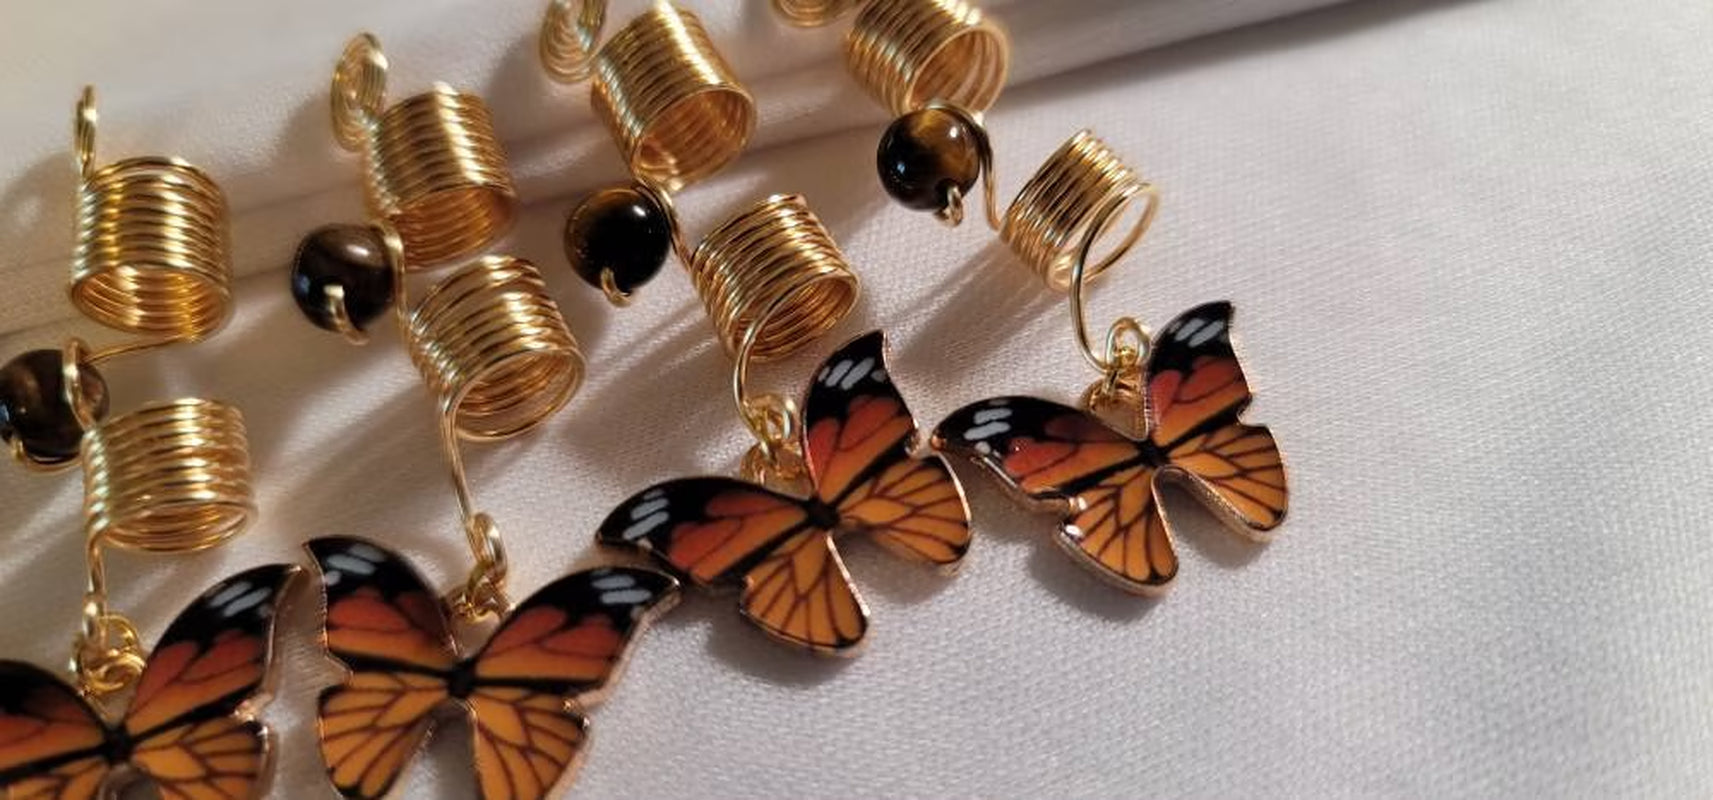 Crystal Butterfly Loc Jewelry, Gold Butterfly Copper Hair Beads, Dreadlock  Hair Accessories, Metal Beads for Braids, Dread Beads 